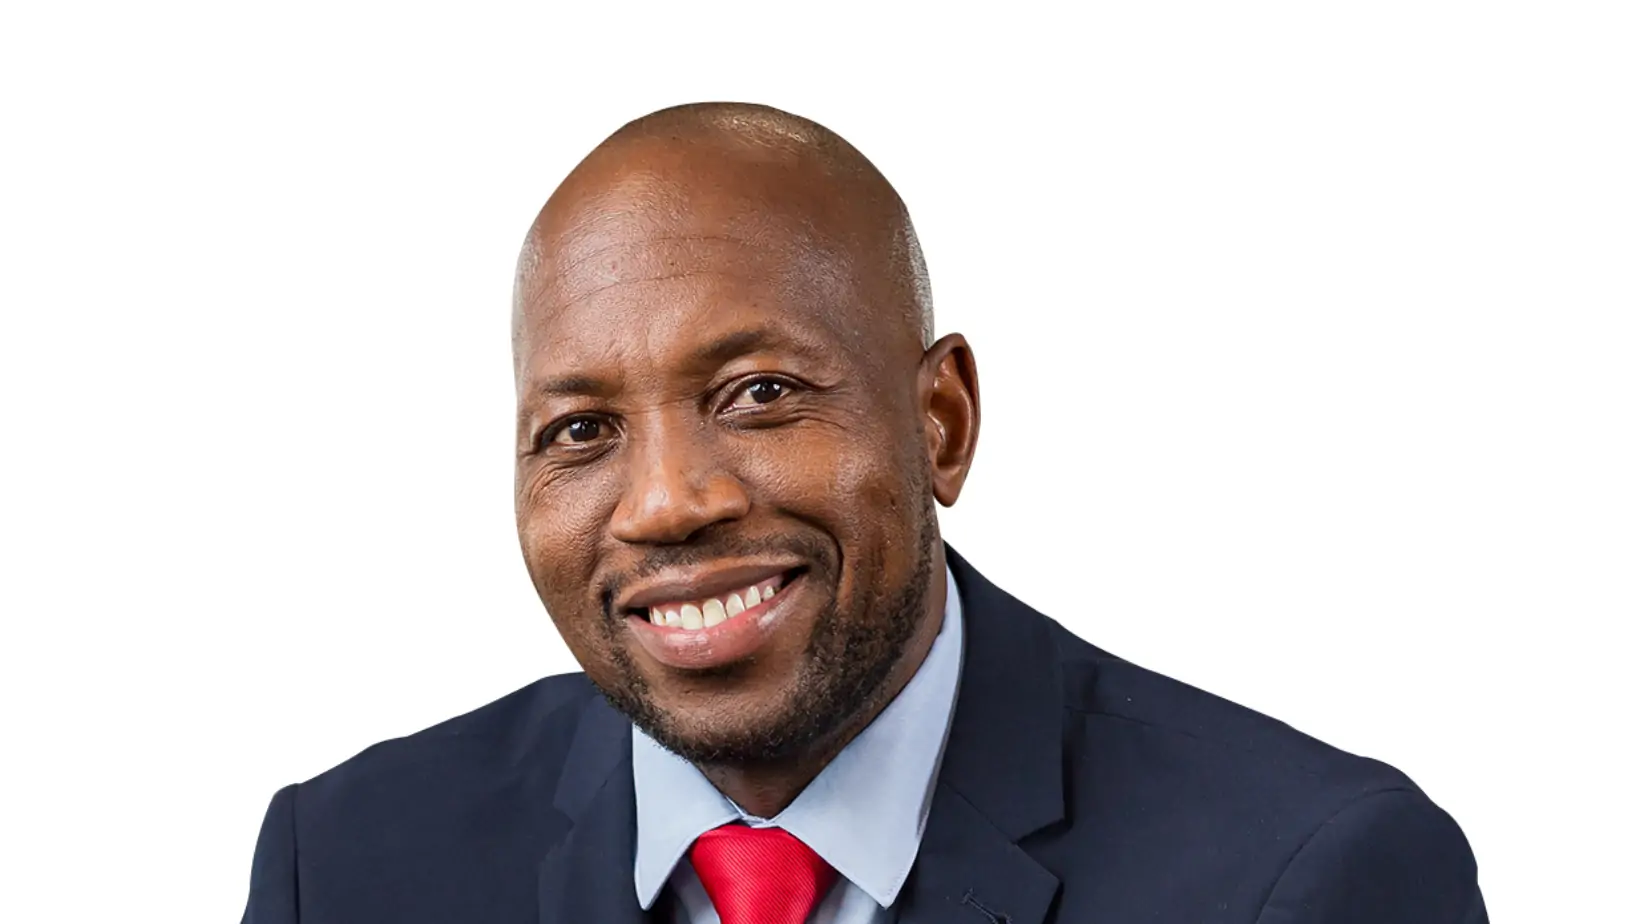 Sasol’s Power Play: Simon Baloyi Takes the Helm as CEO, Setting the Stage for a Resilient Future